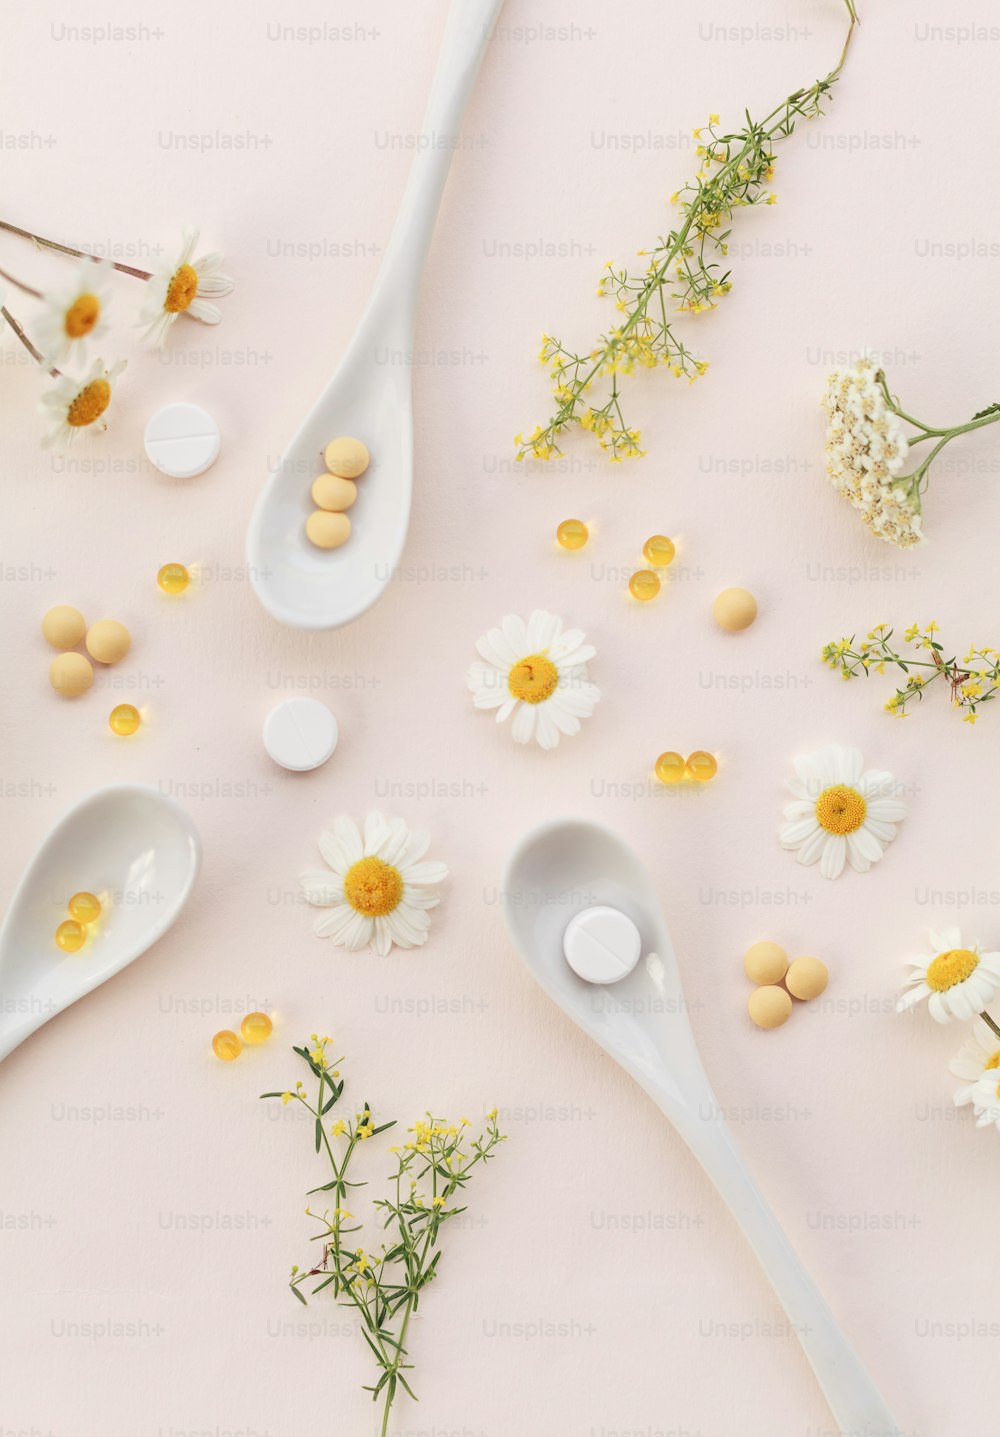 spoons with flowers and pills on a pink surface